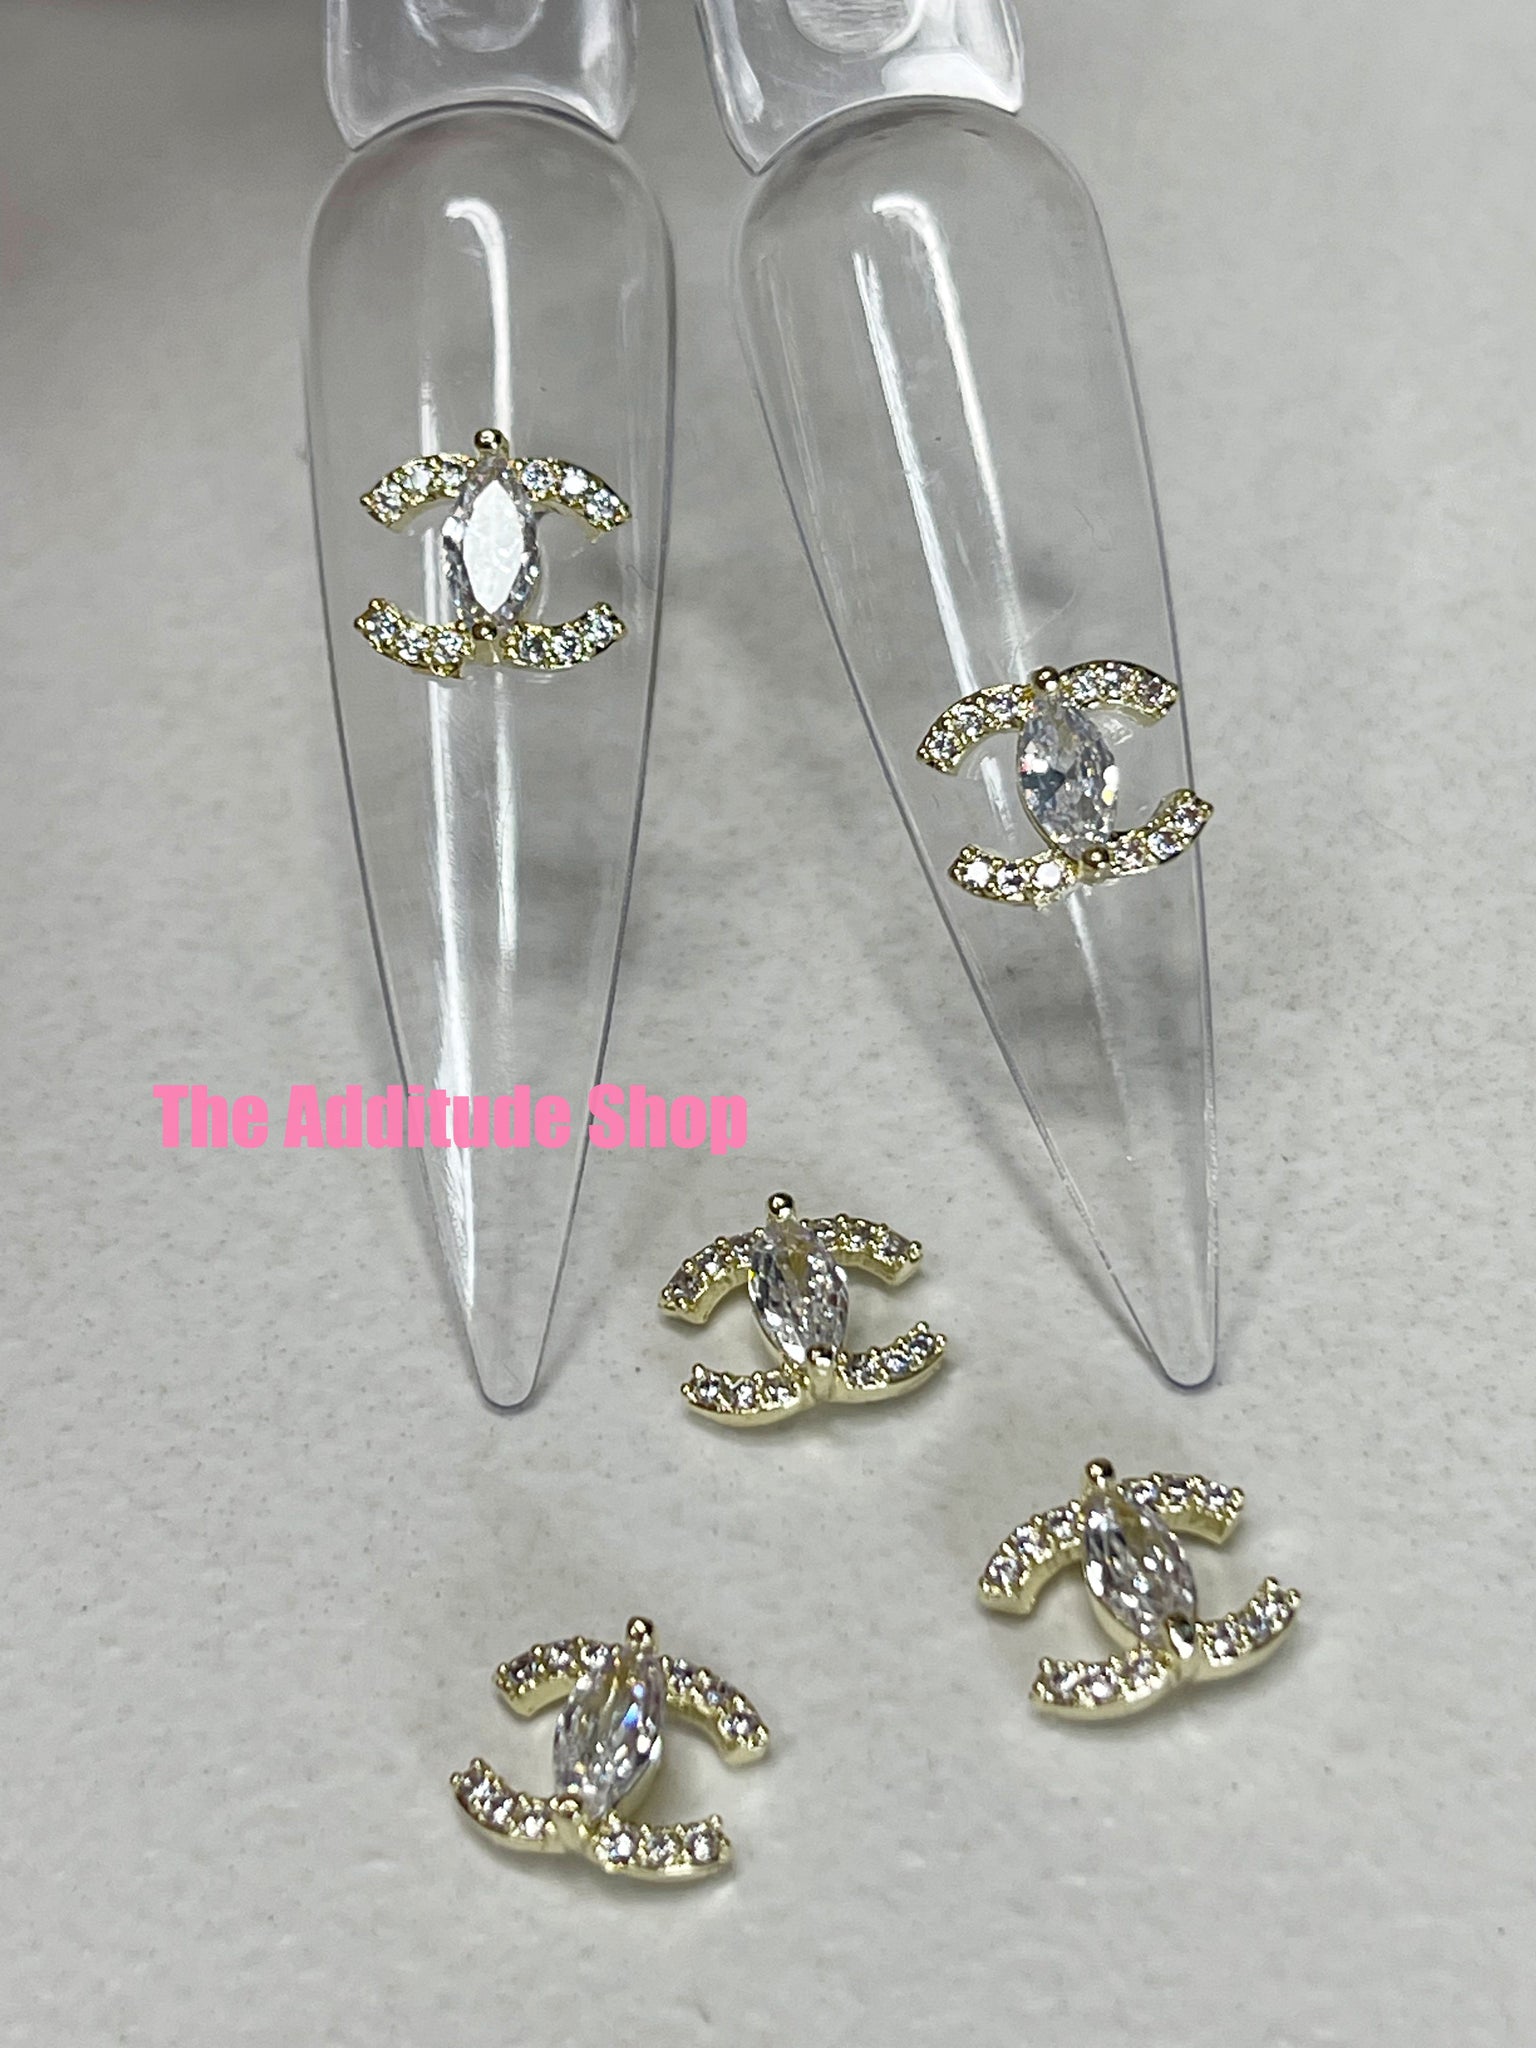 Stylish Nail Charms for Manicures in Bulk 